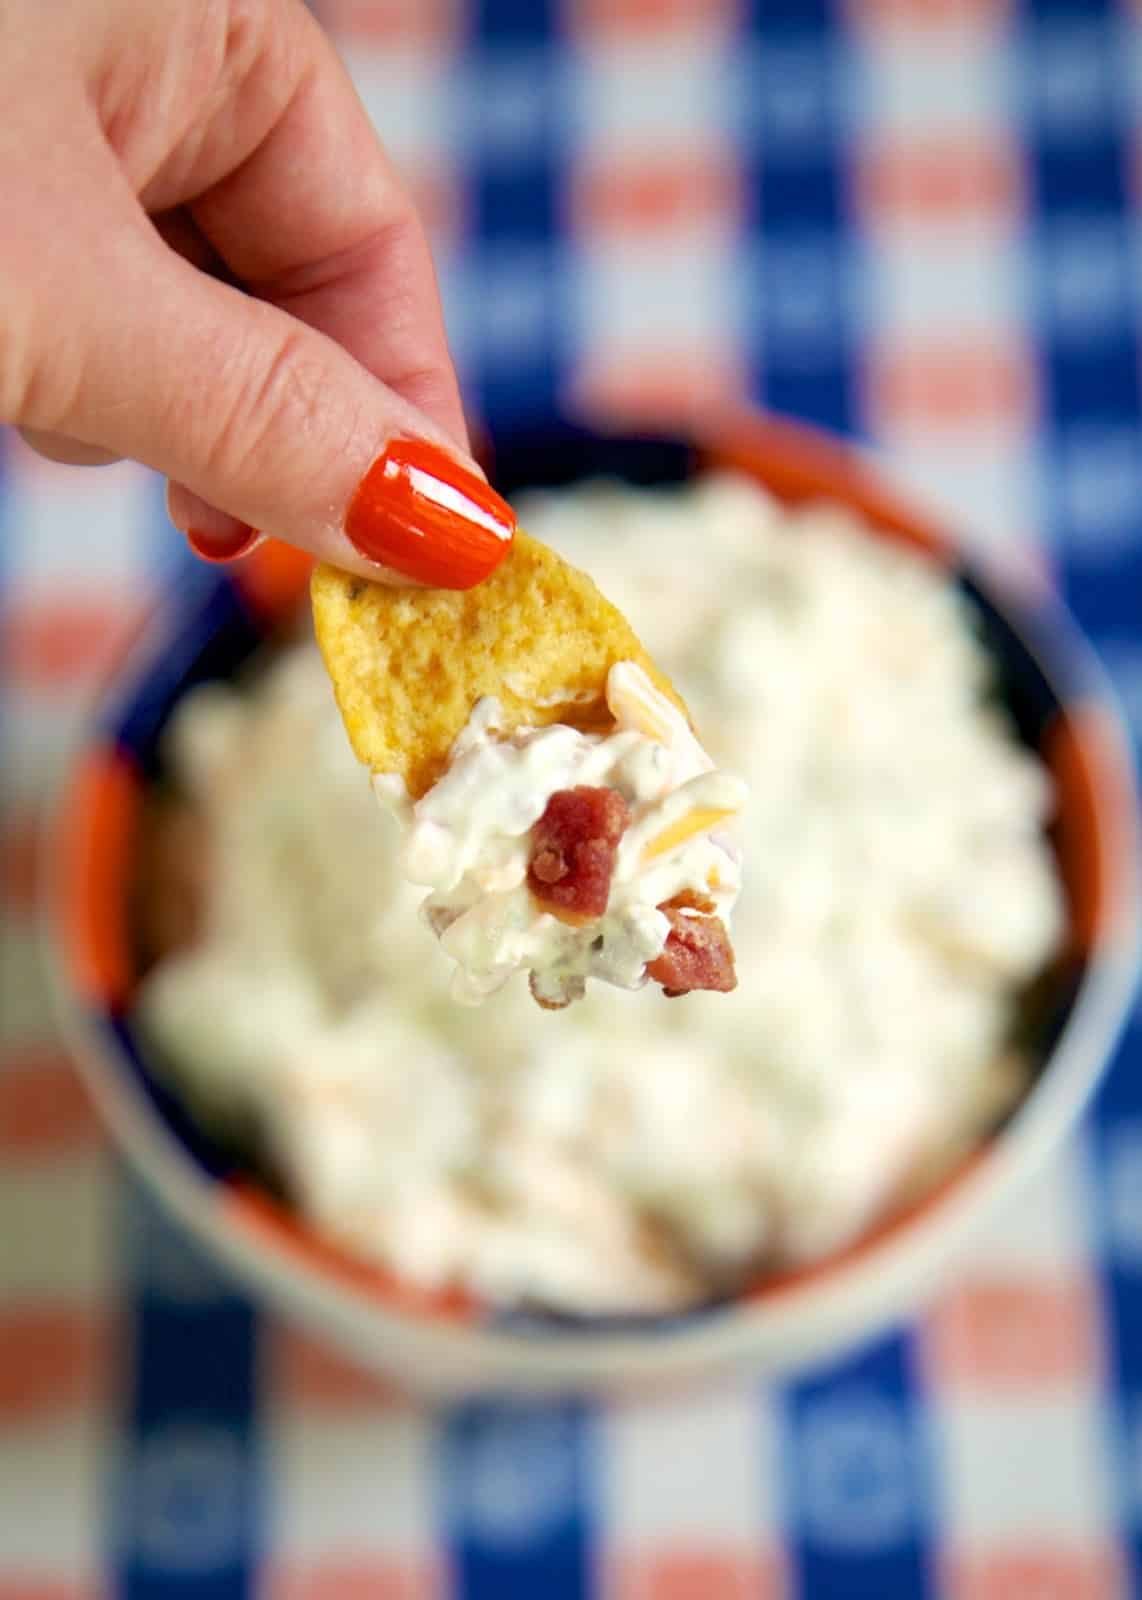 Cheddar Bacon Dip - The ORIGINAL Crack Dip - I always double the recipe and there is never any leftovers! People go crazy for this dip!! Sour cream dip loaded with cheddar, bacon and ranch. This dip is crazy addictive!! SO good!